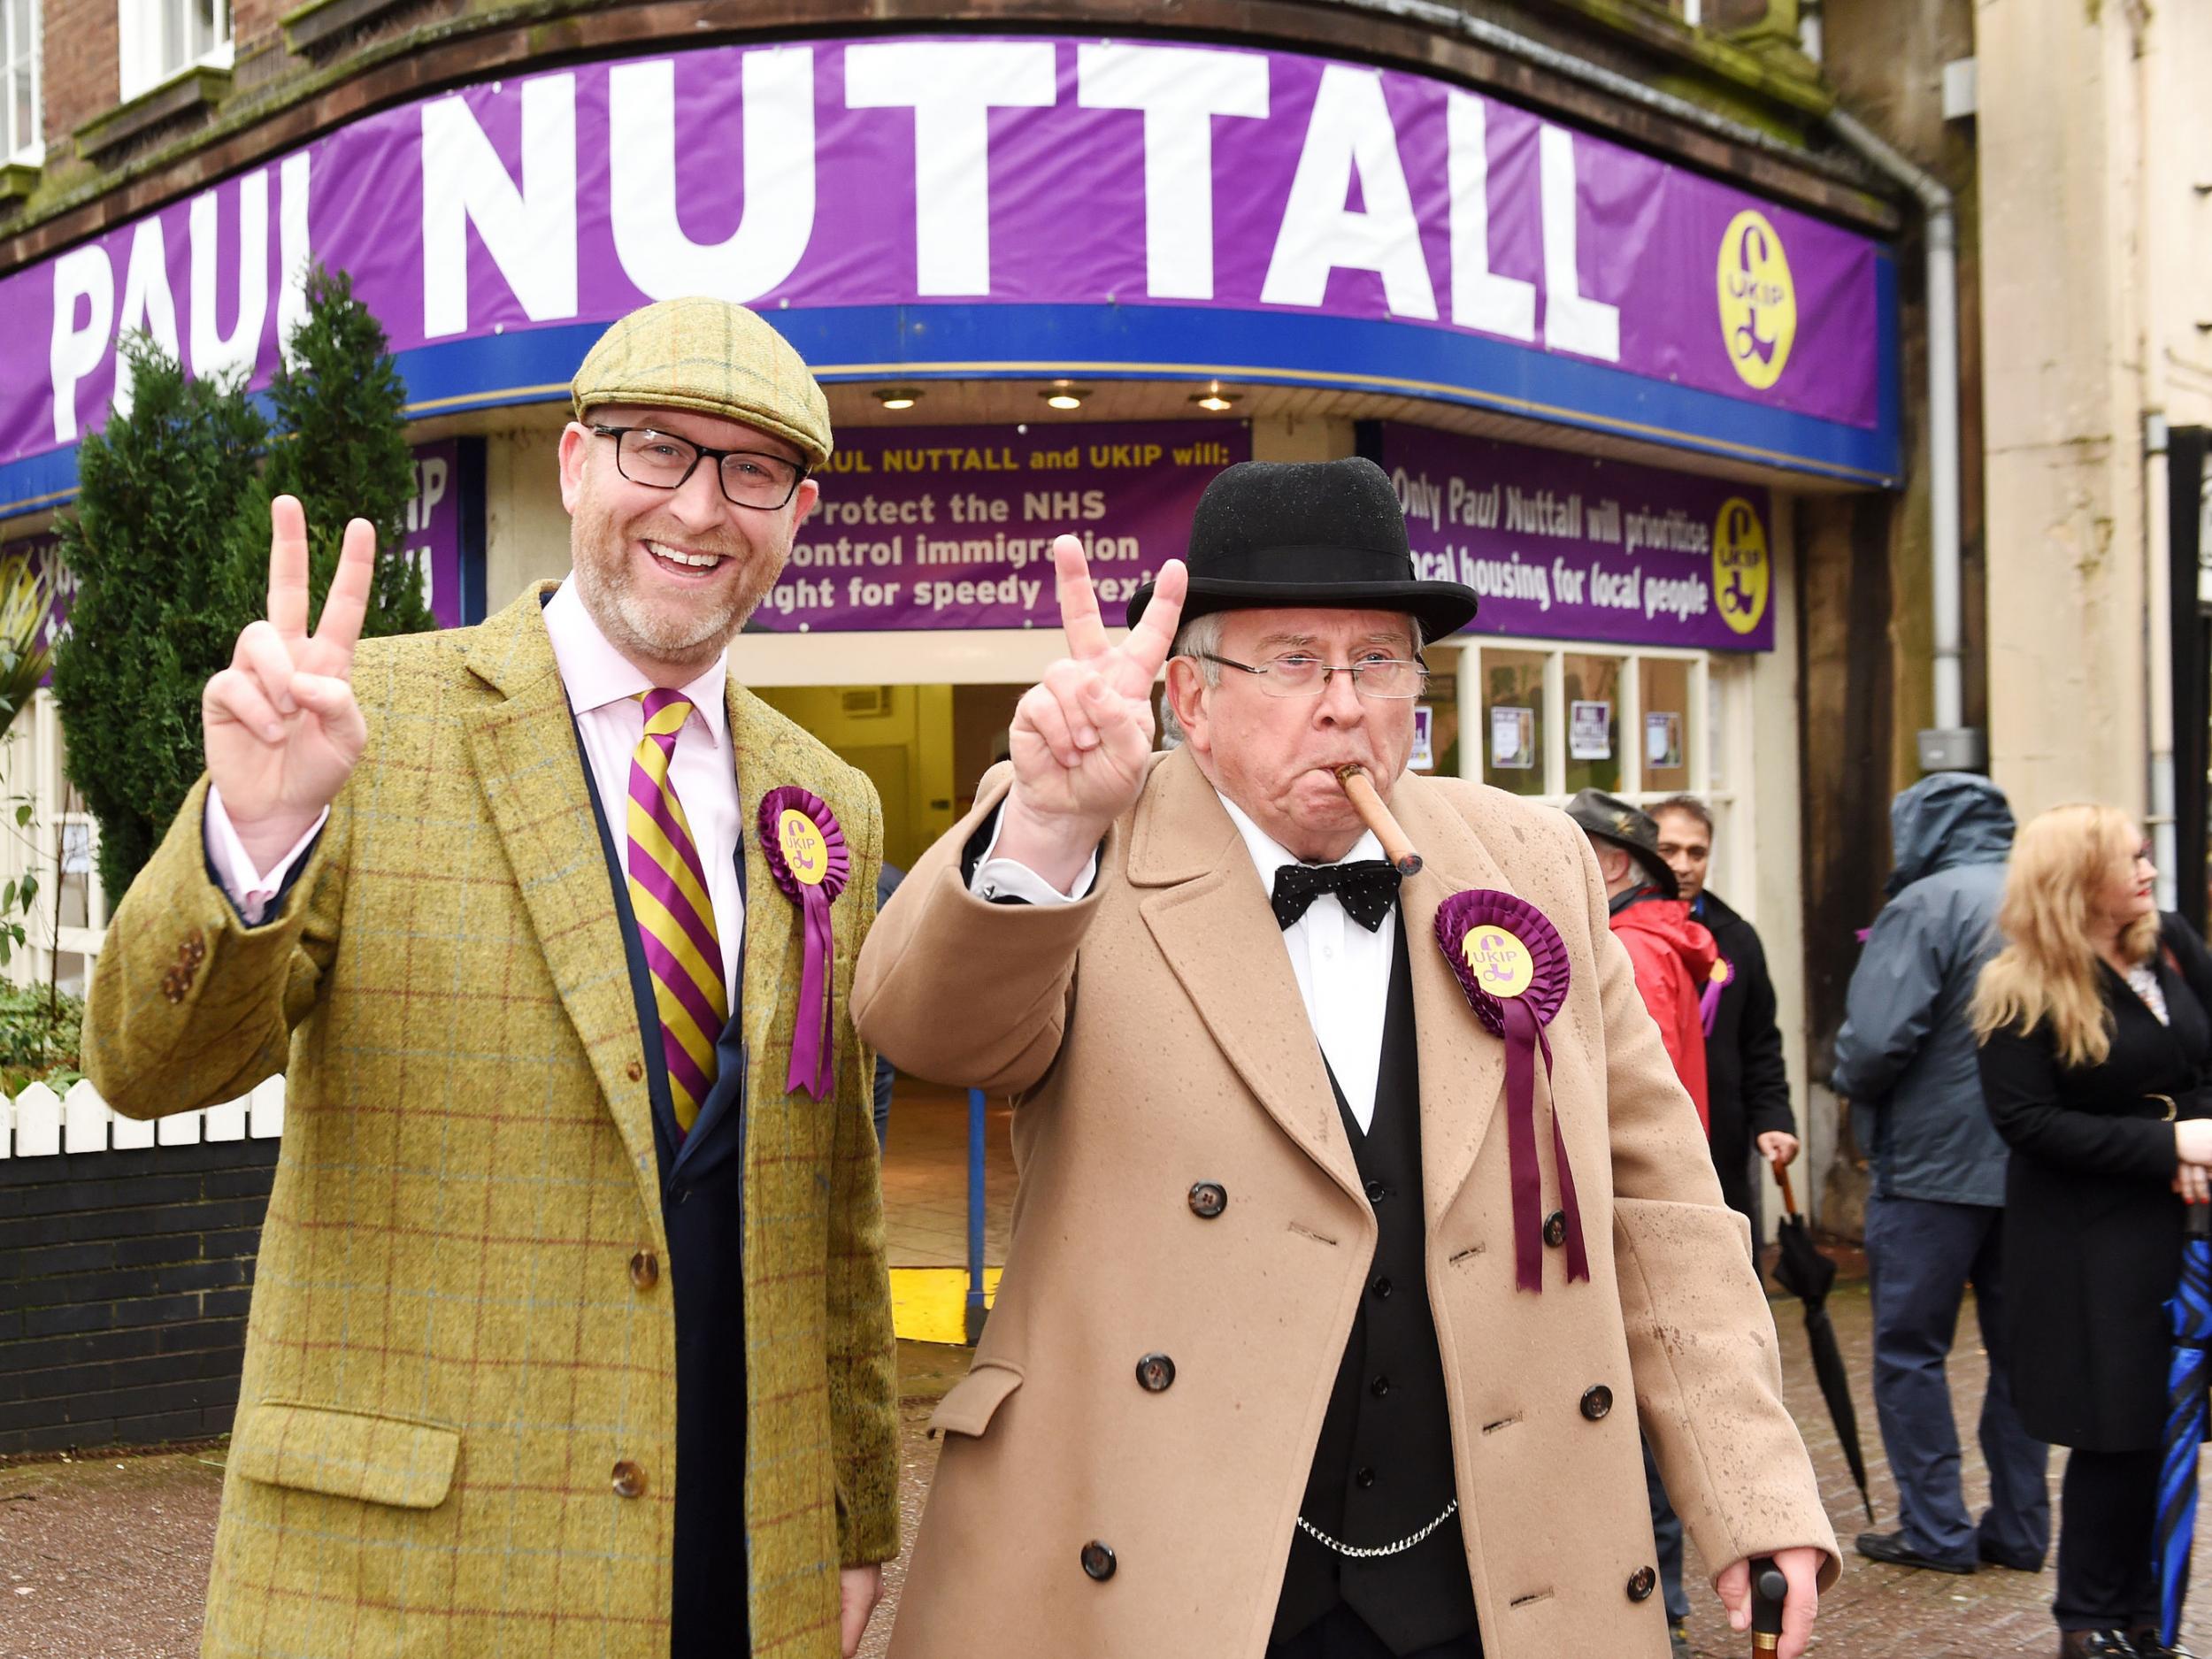 We shall fight them in the Potteries: the Ukip leader outside the party HQ in Stoke, where he is standing for MP, with a supporter channelling the spirit of Churchill